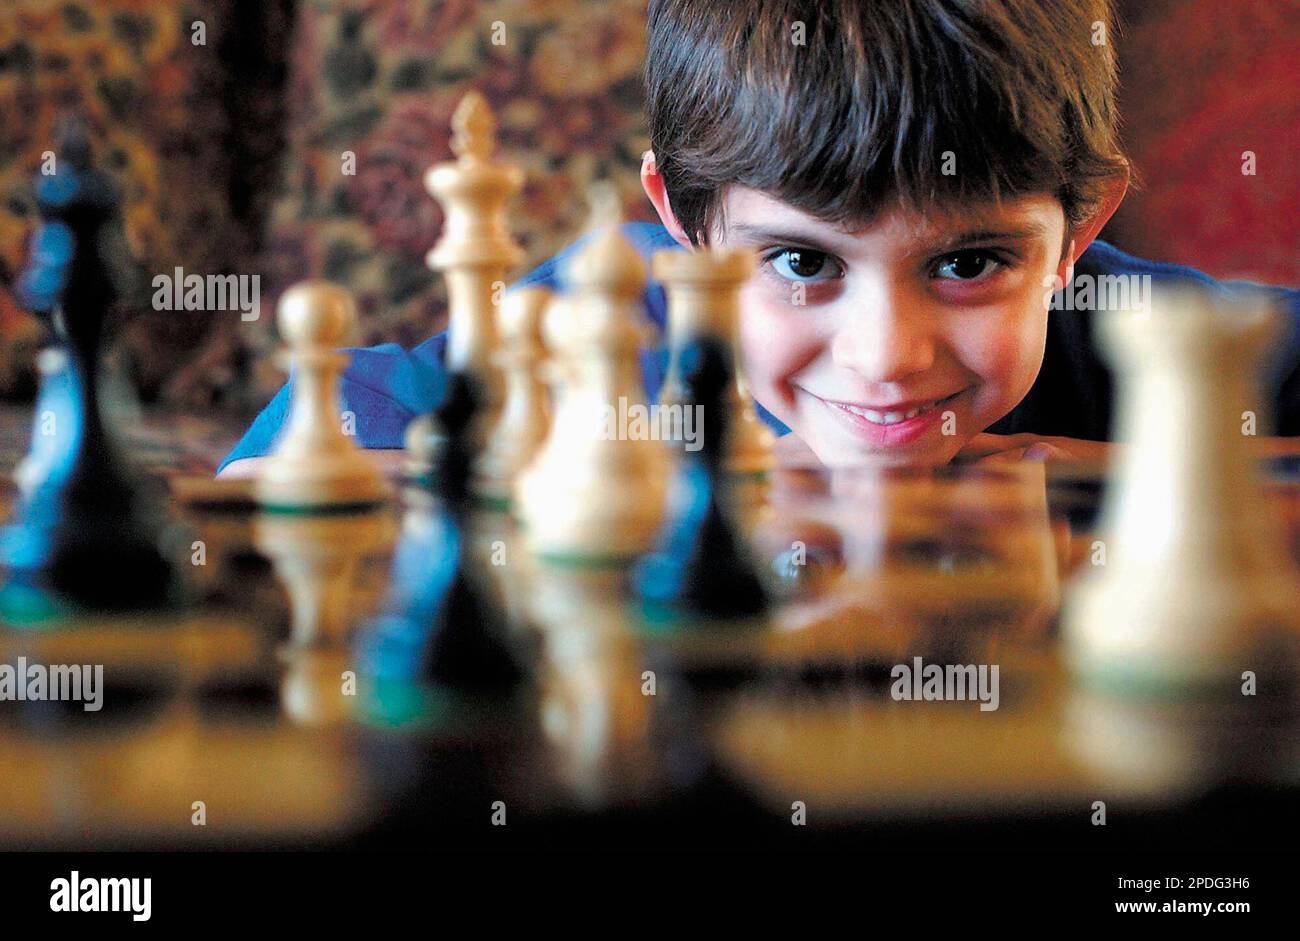 Six-year-old Ian Gilchrist is seen Dec. 21, 2005 behind a chess board at  his home in Marion, Ill. Gilchrist won a scholastic chess tournament  earlier this month, sponsored by the U.S. Chess